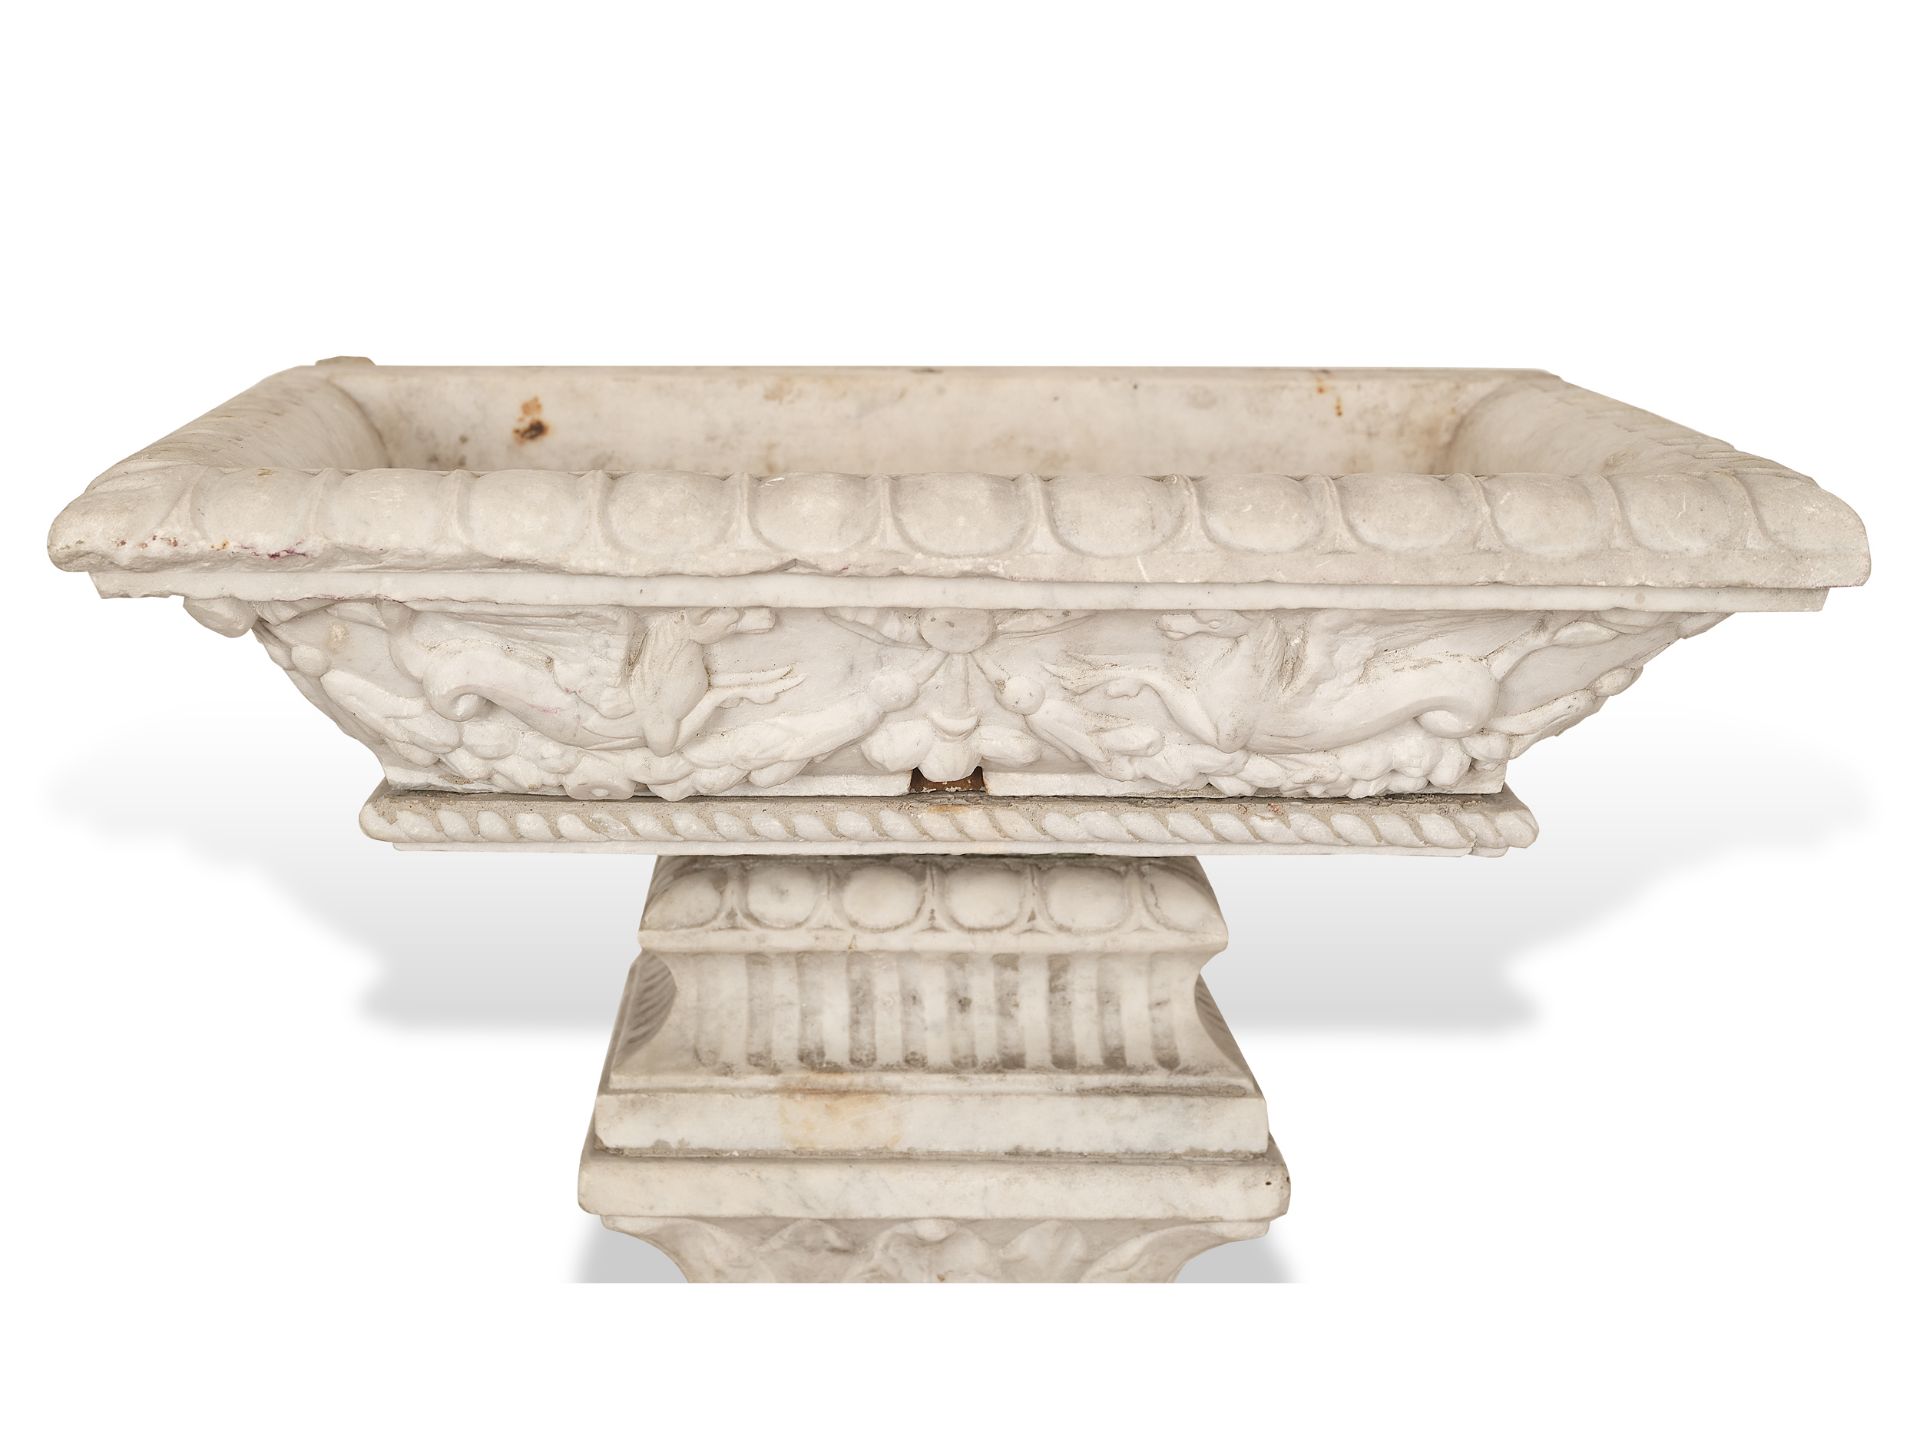 Marble fountain, Italy, 18th century - Image 5 of 8